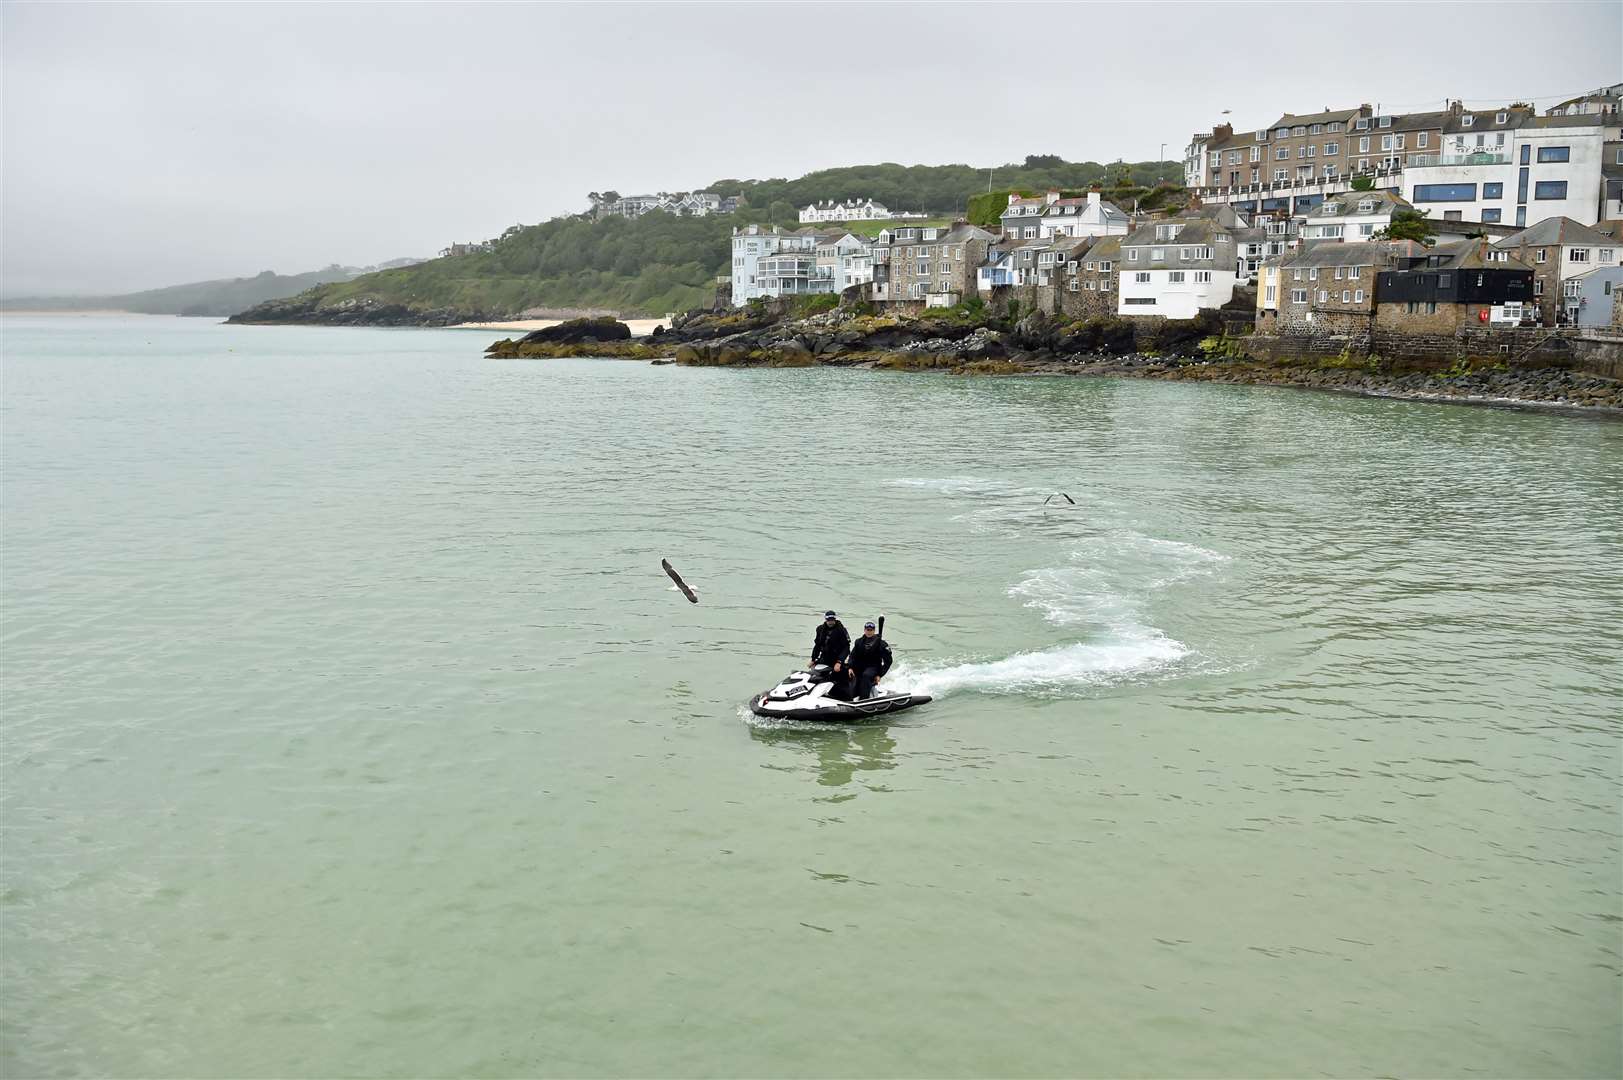 Police officers on a jet ski patrol the bay in St Ives during the G7 summit in Cornwall (Ben Birchall/PA)